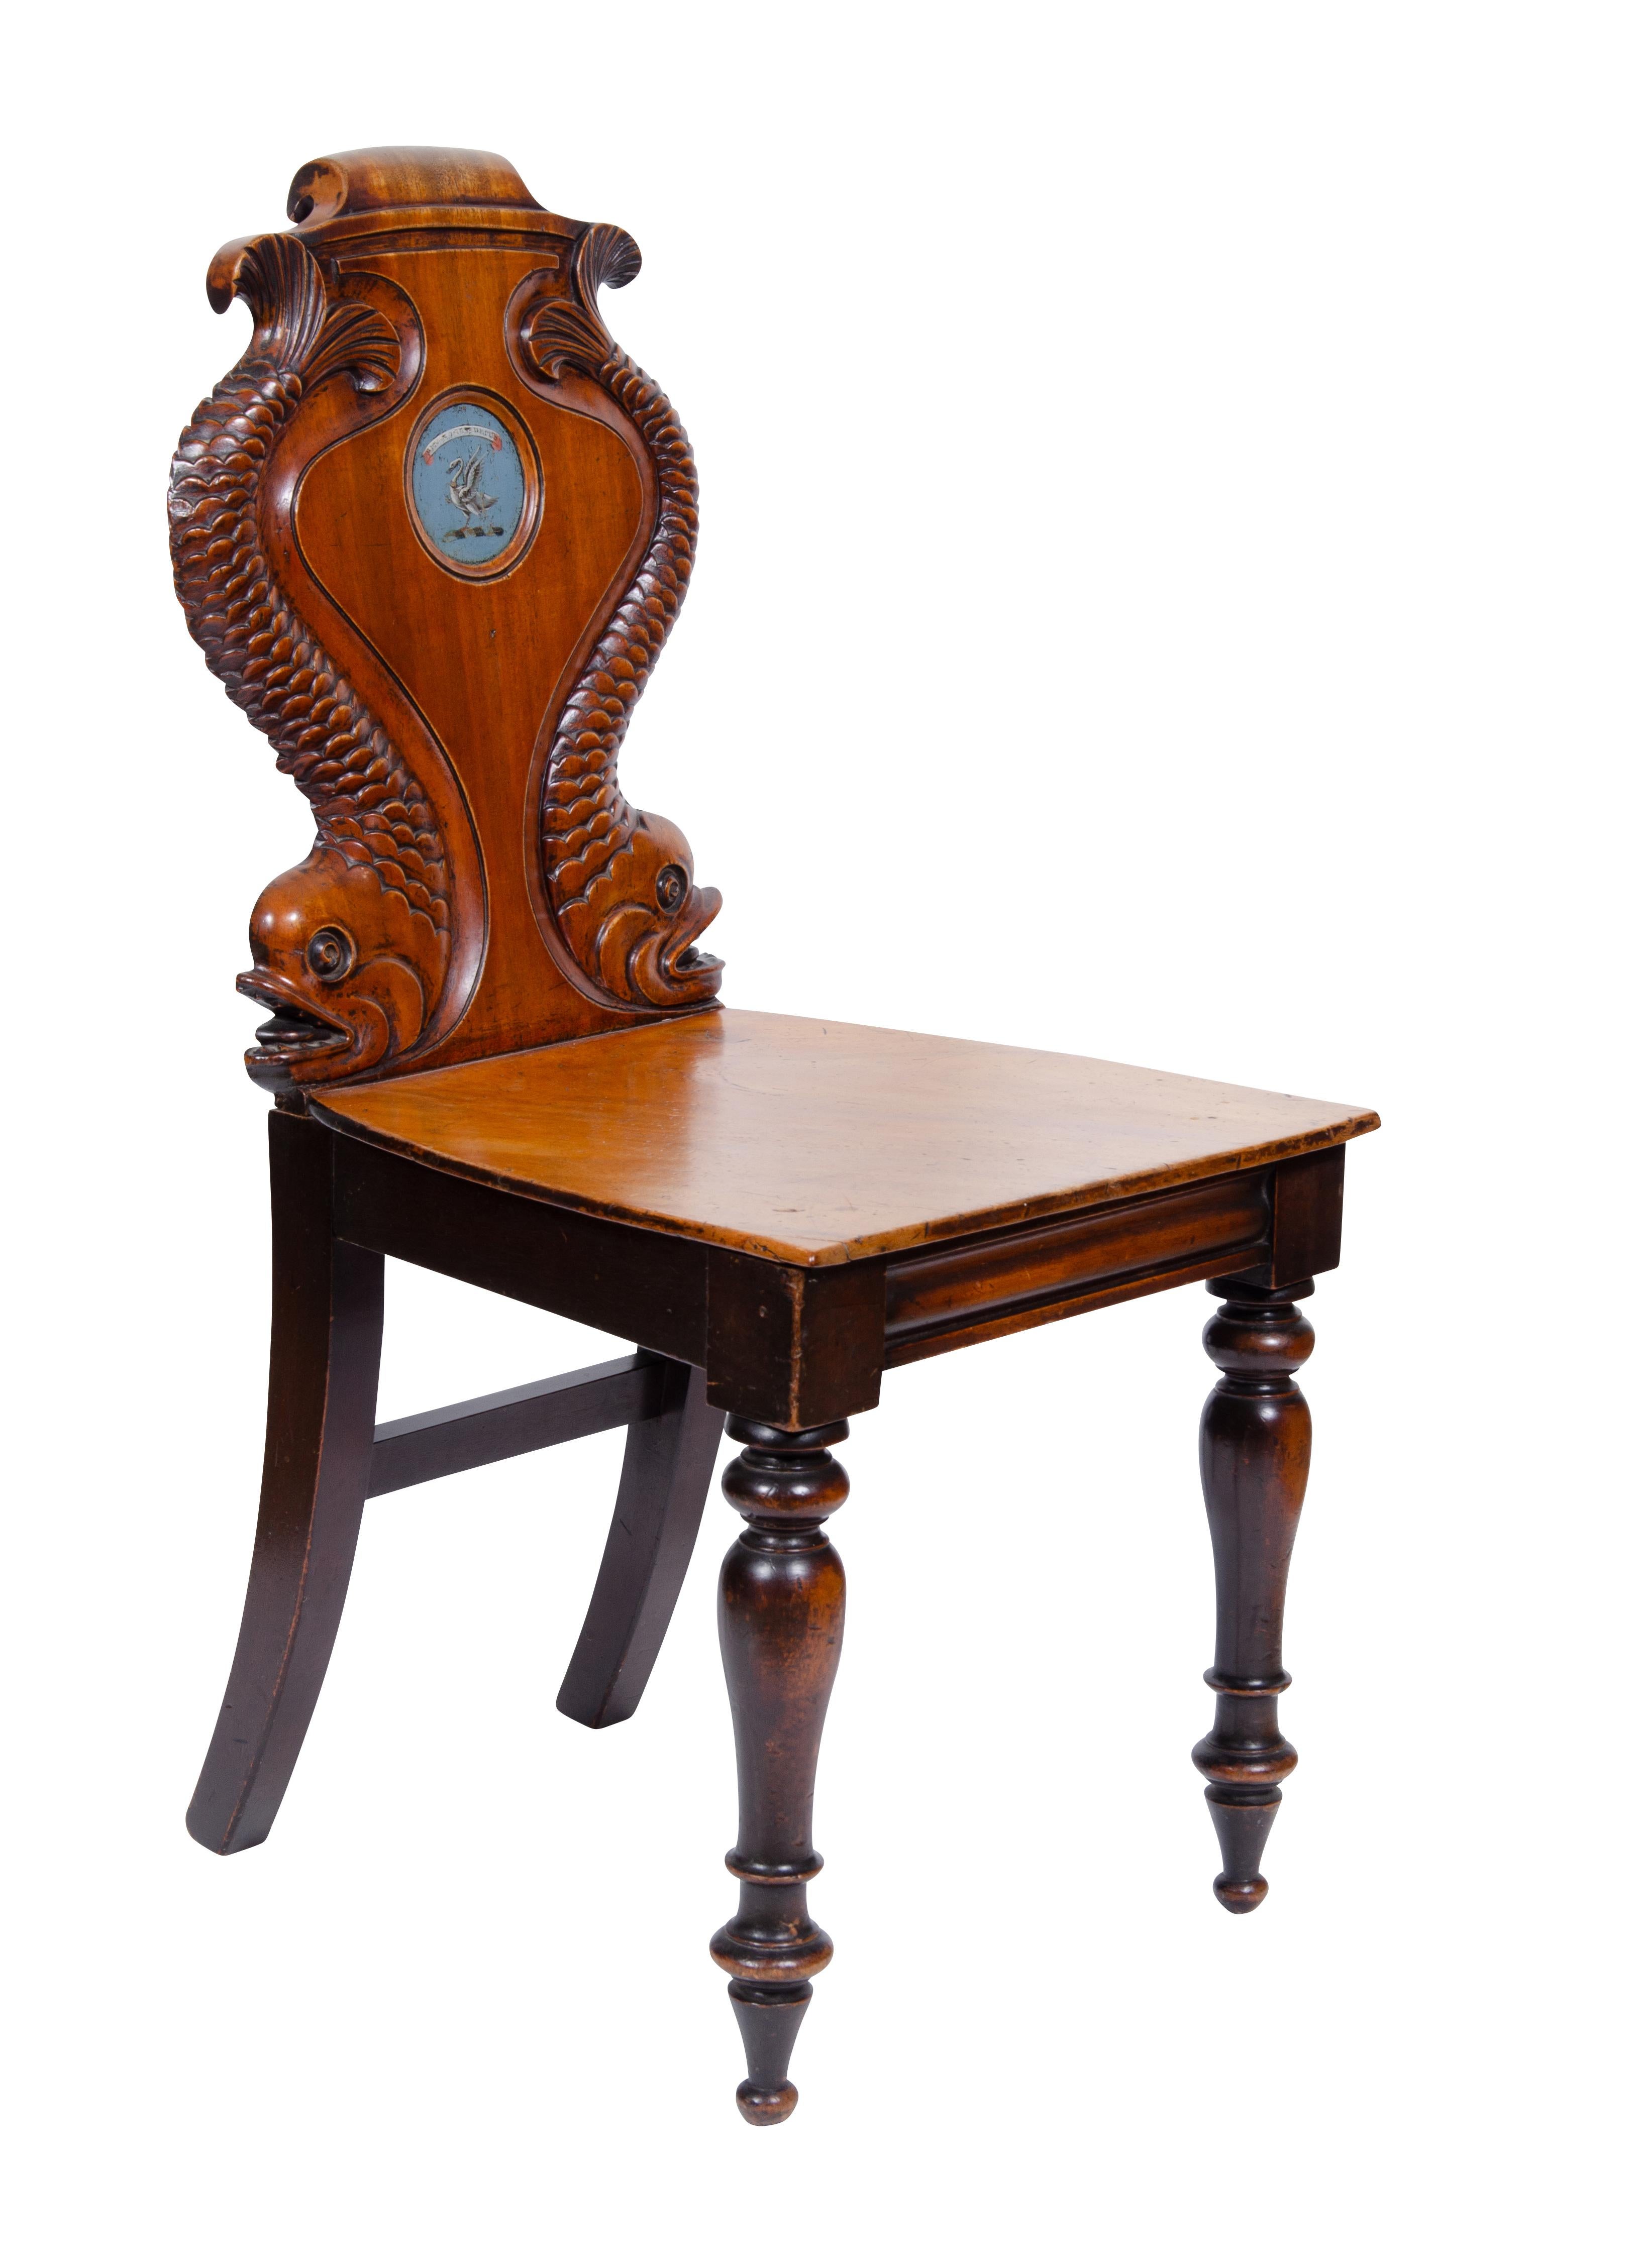 Unusual, each chair back with two carved dolphins and central painted coats of arms, solid wood seats raised on circular tapered legs. These chairs are part of a larger set which would have been placed in a hallway in an upscale British home.